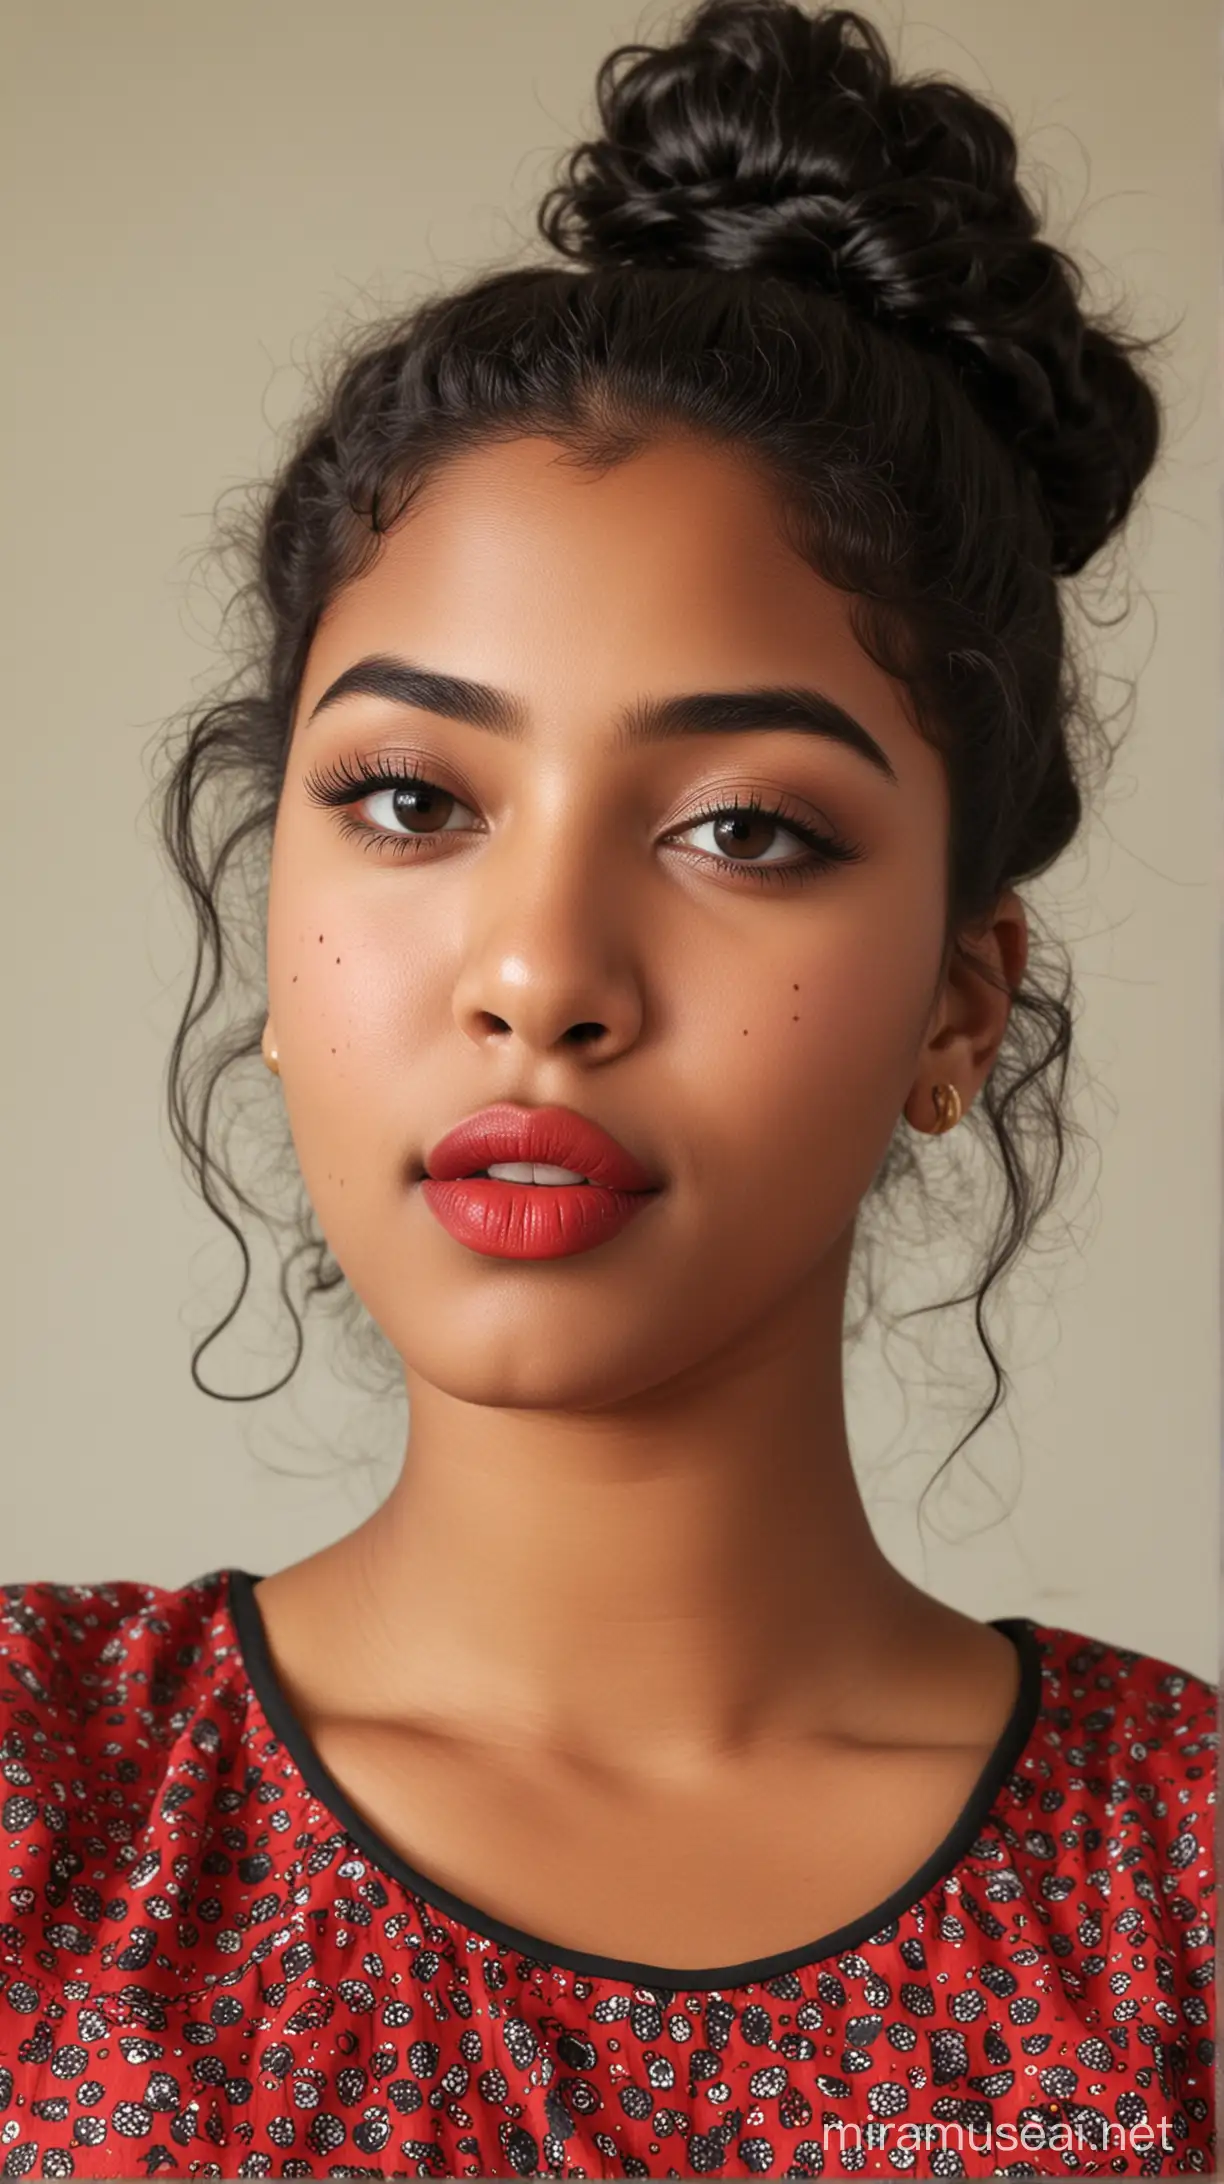 A 17 year old fat black woman with small eyes, wide red lips, weak chin, small nose and long curly black hair with a bun at back wearing a kurti